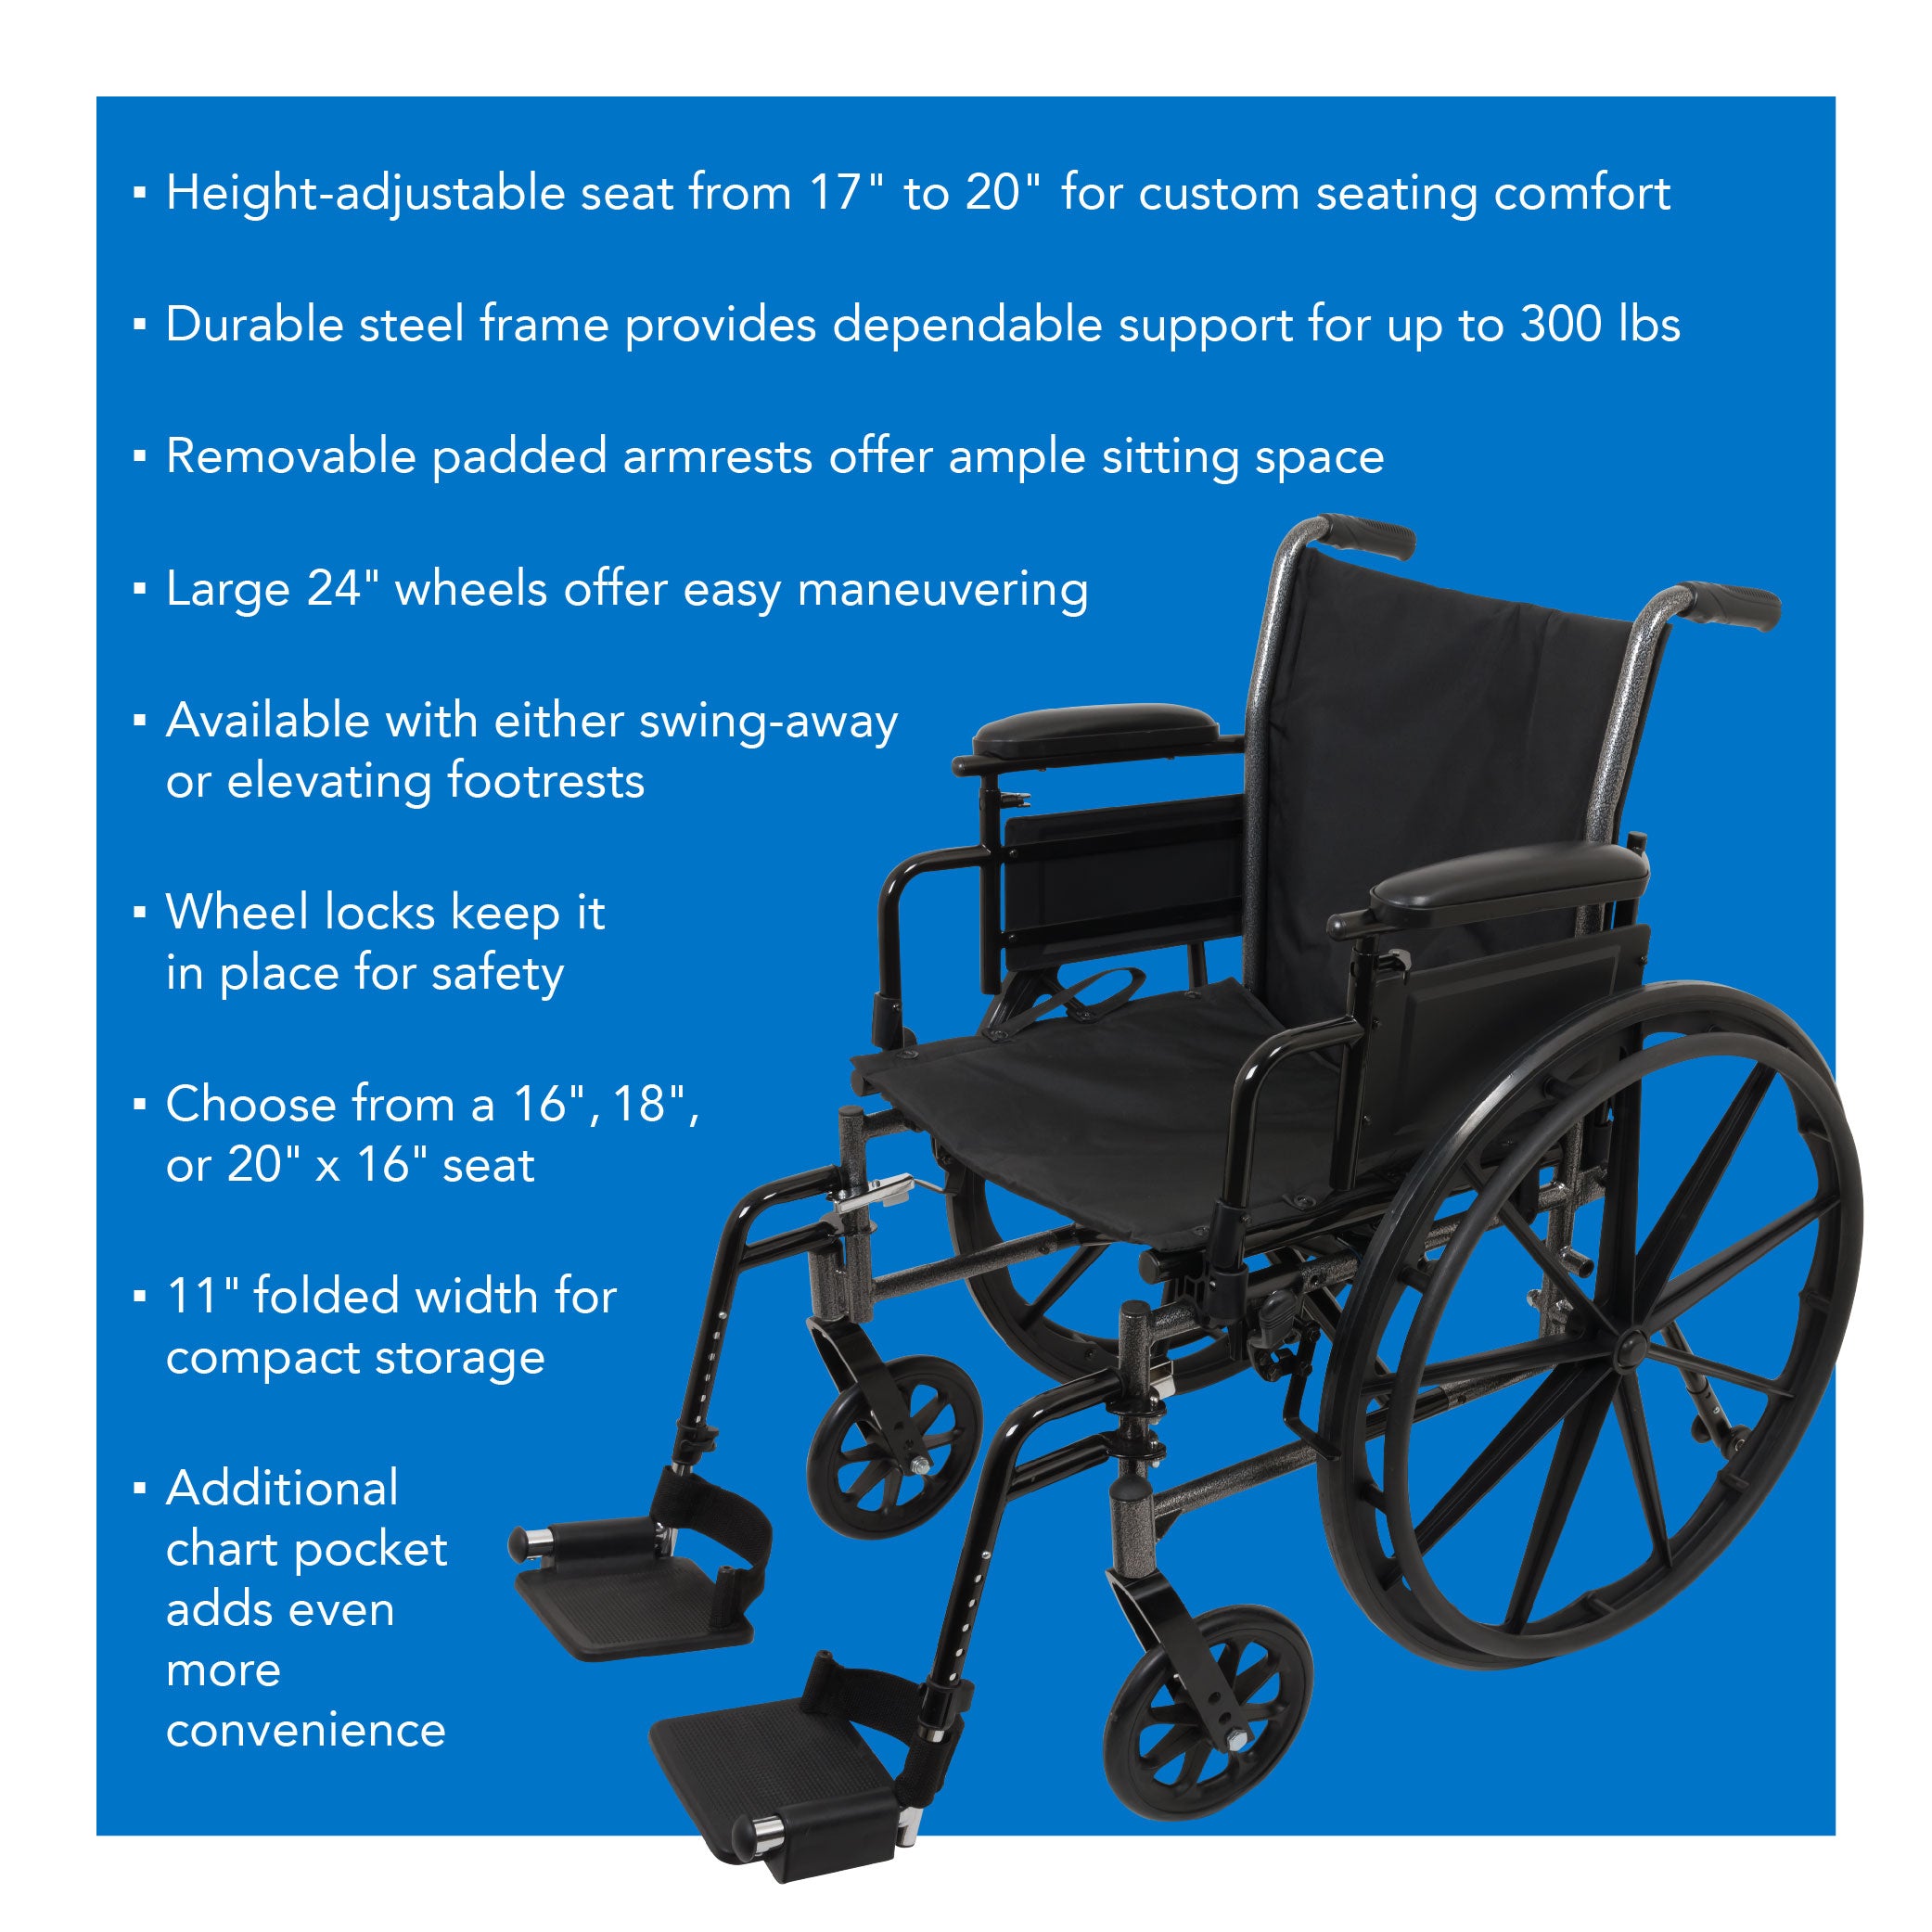 ProBasics K3 Lightweight Wheelchair with Flip-Back Arms and Seat Extension - Carex Health Brands